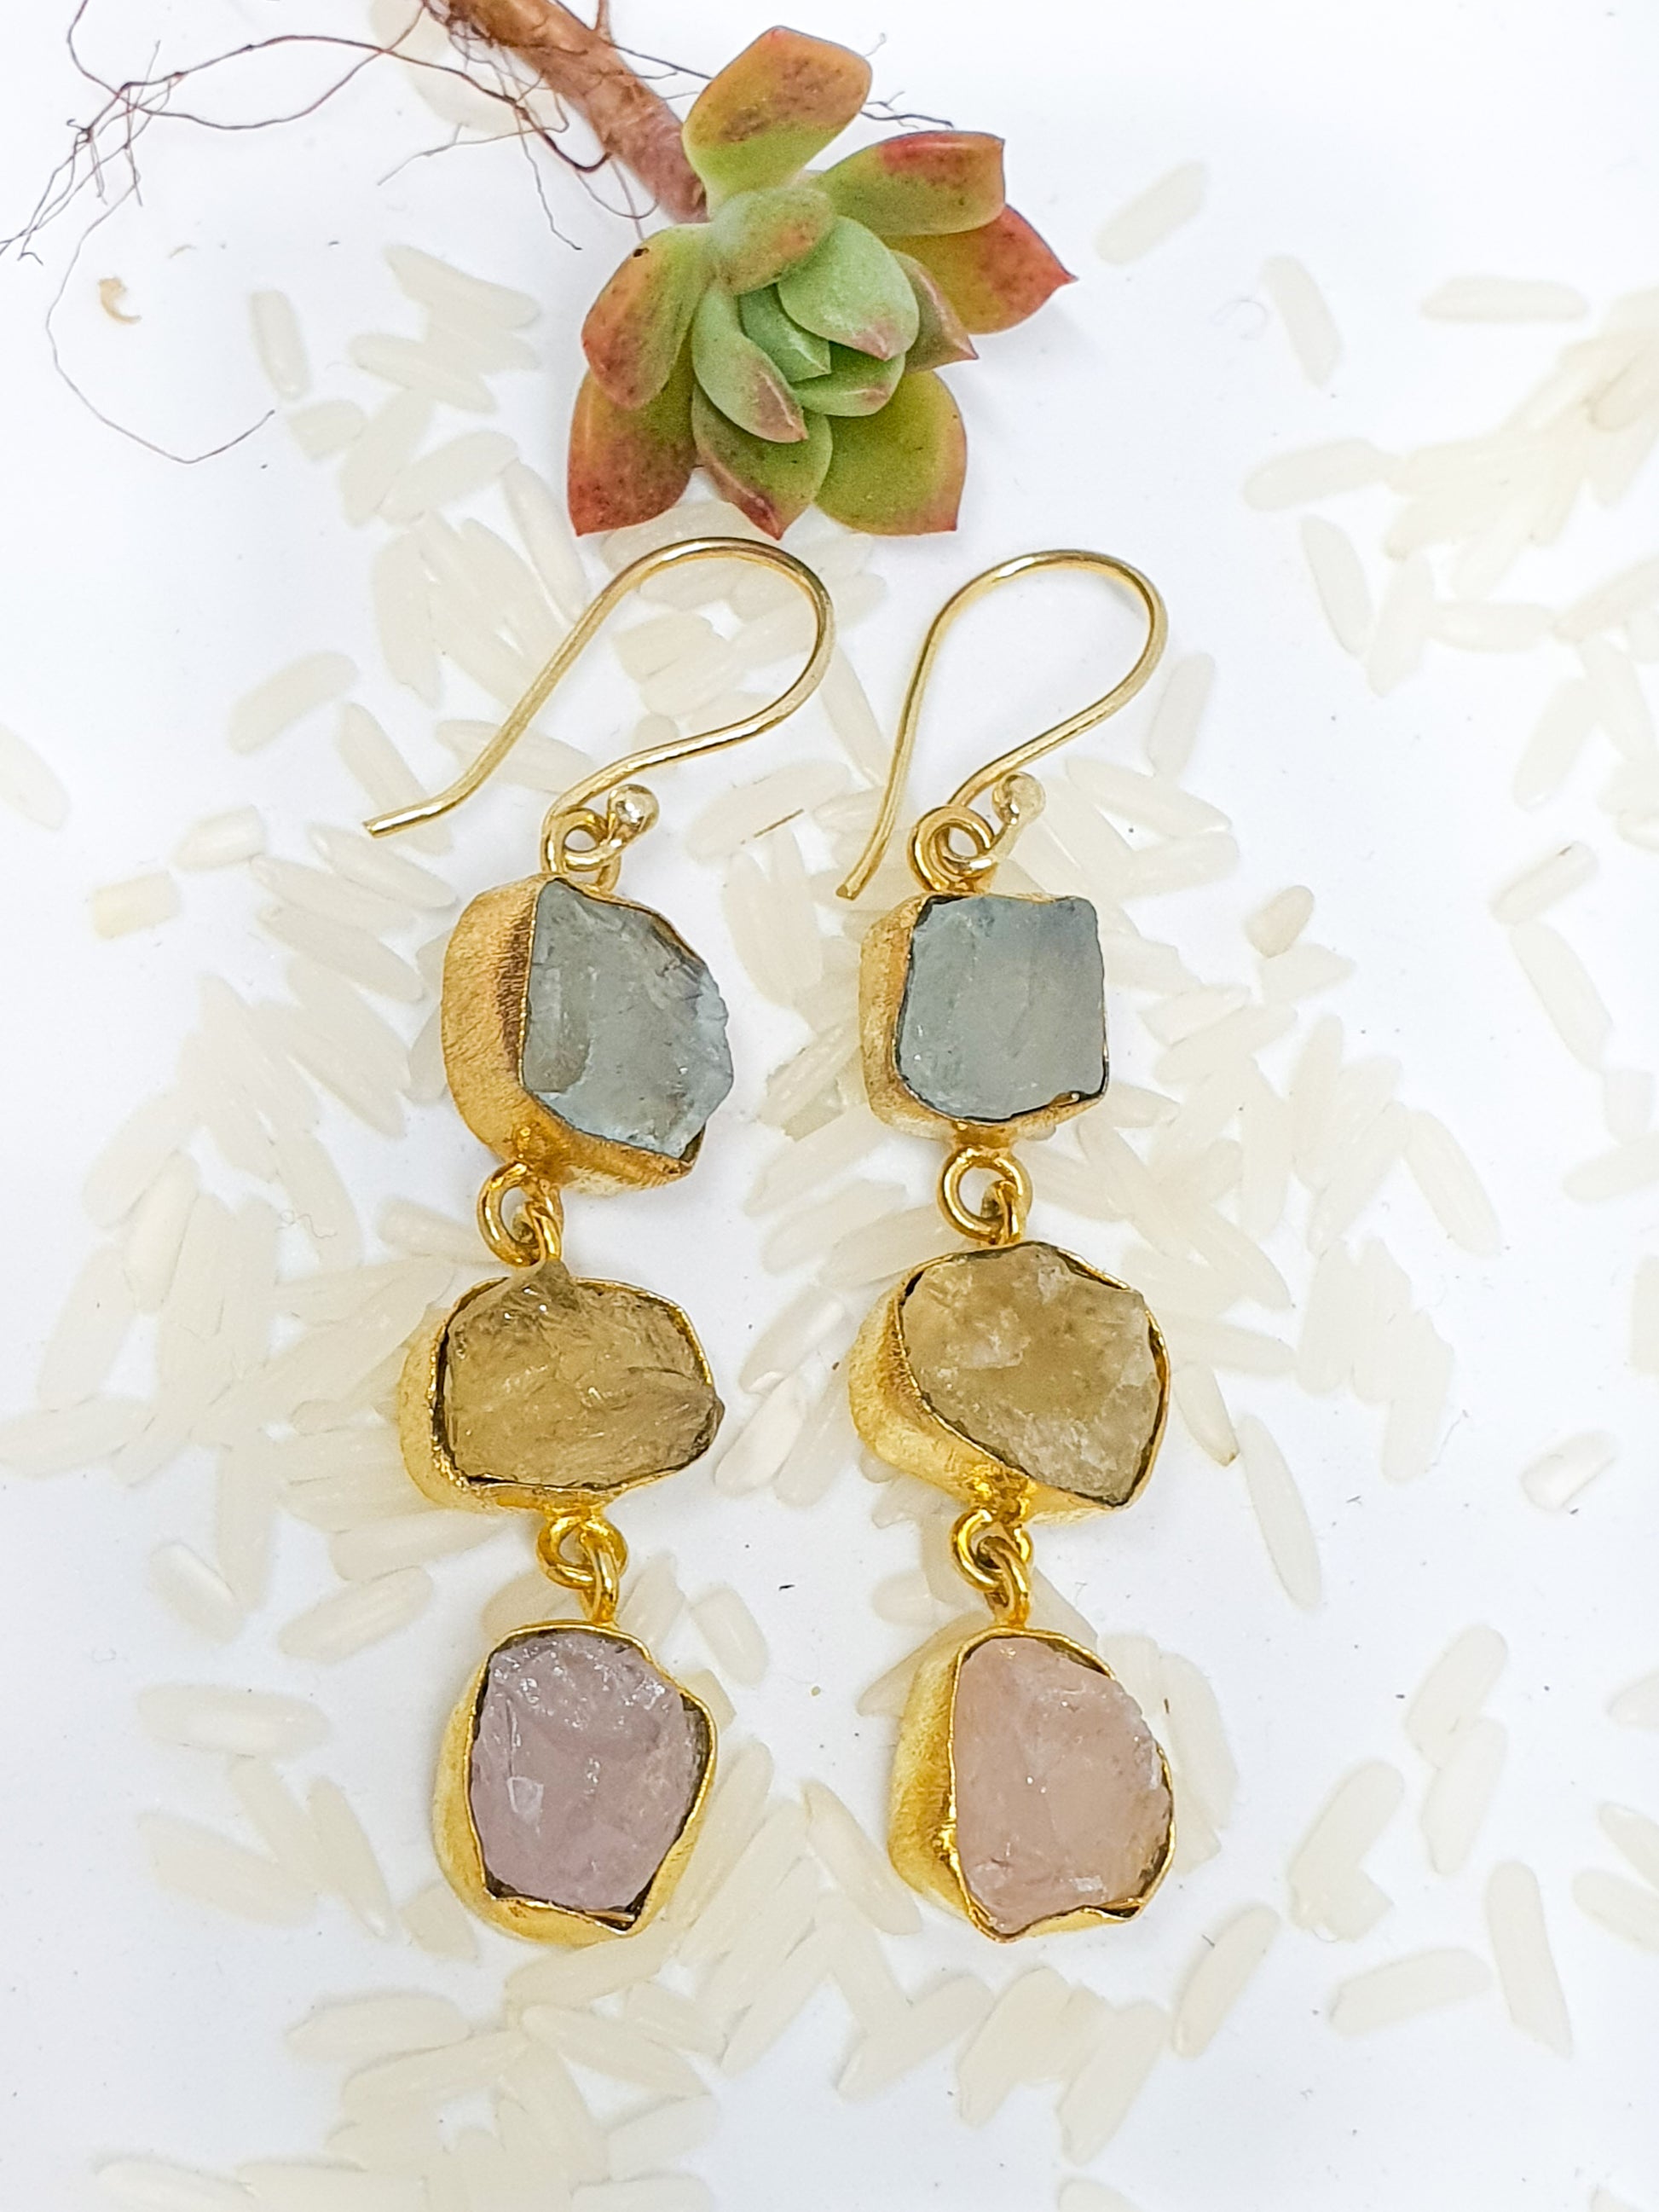 Gold earrings with 3 drops of crystals